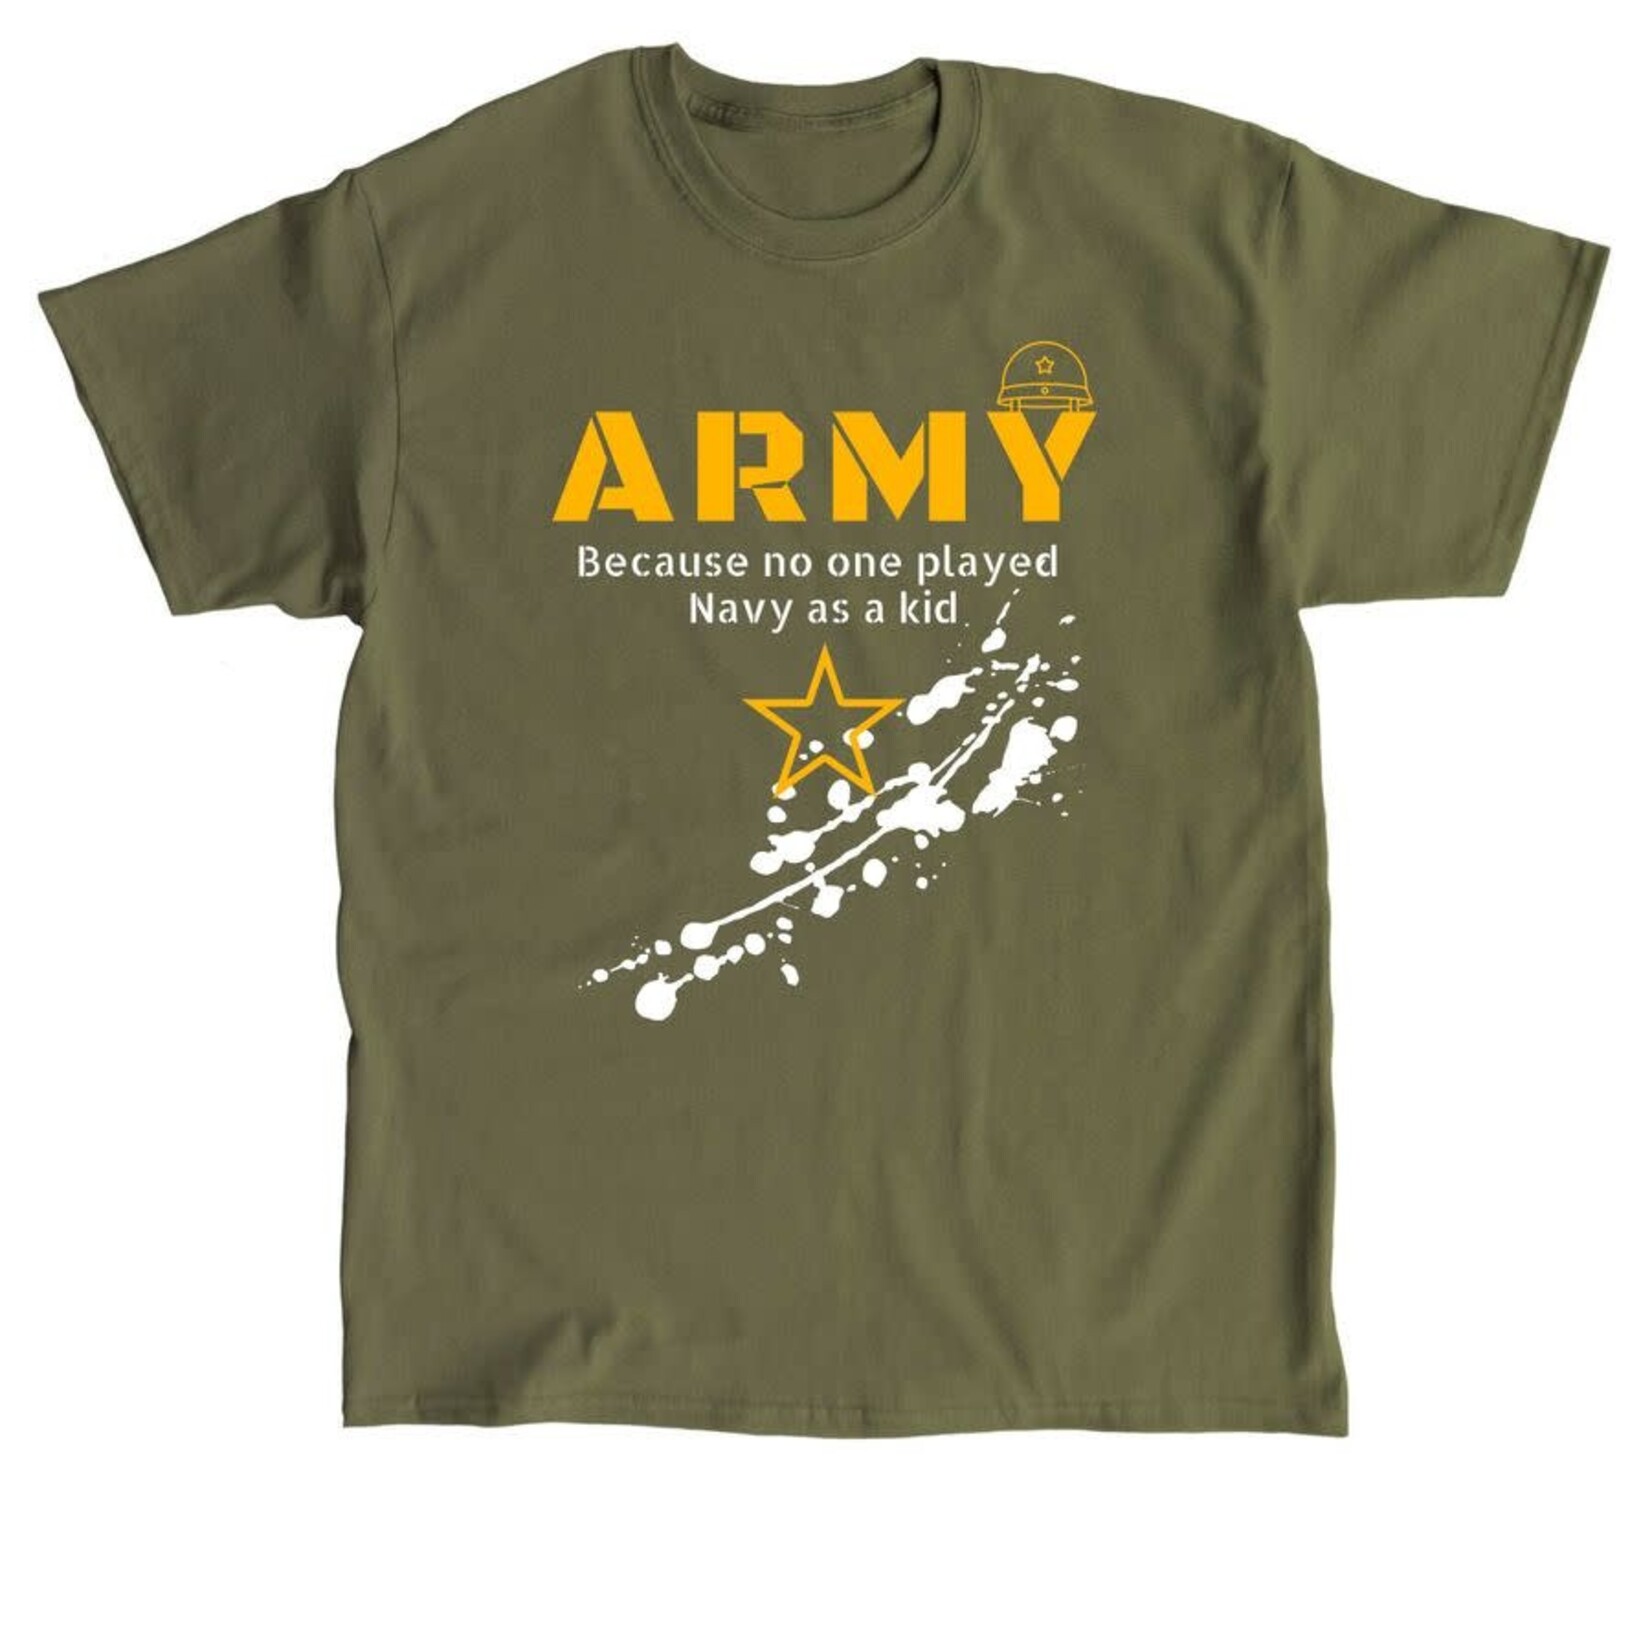 Army, Because!  OD Green Med Tshirt